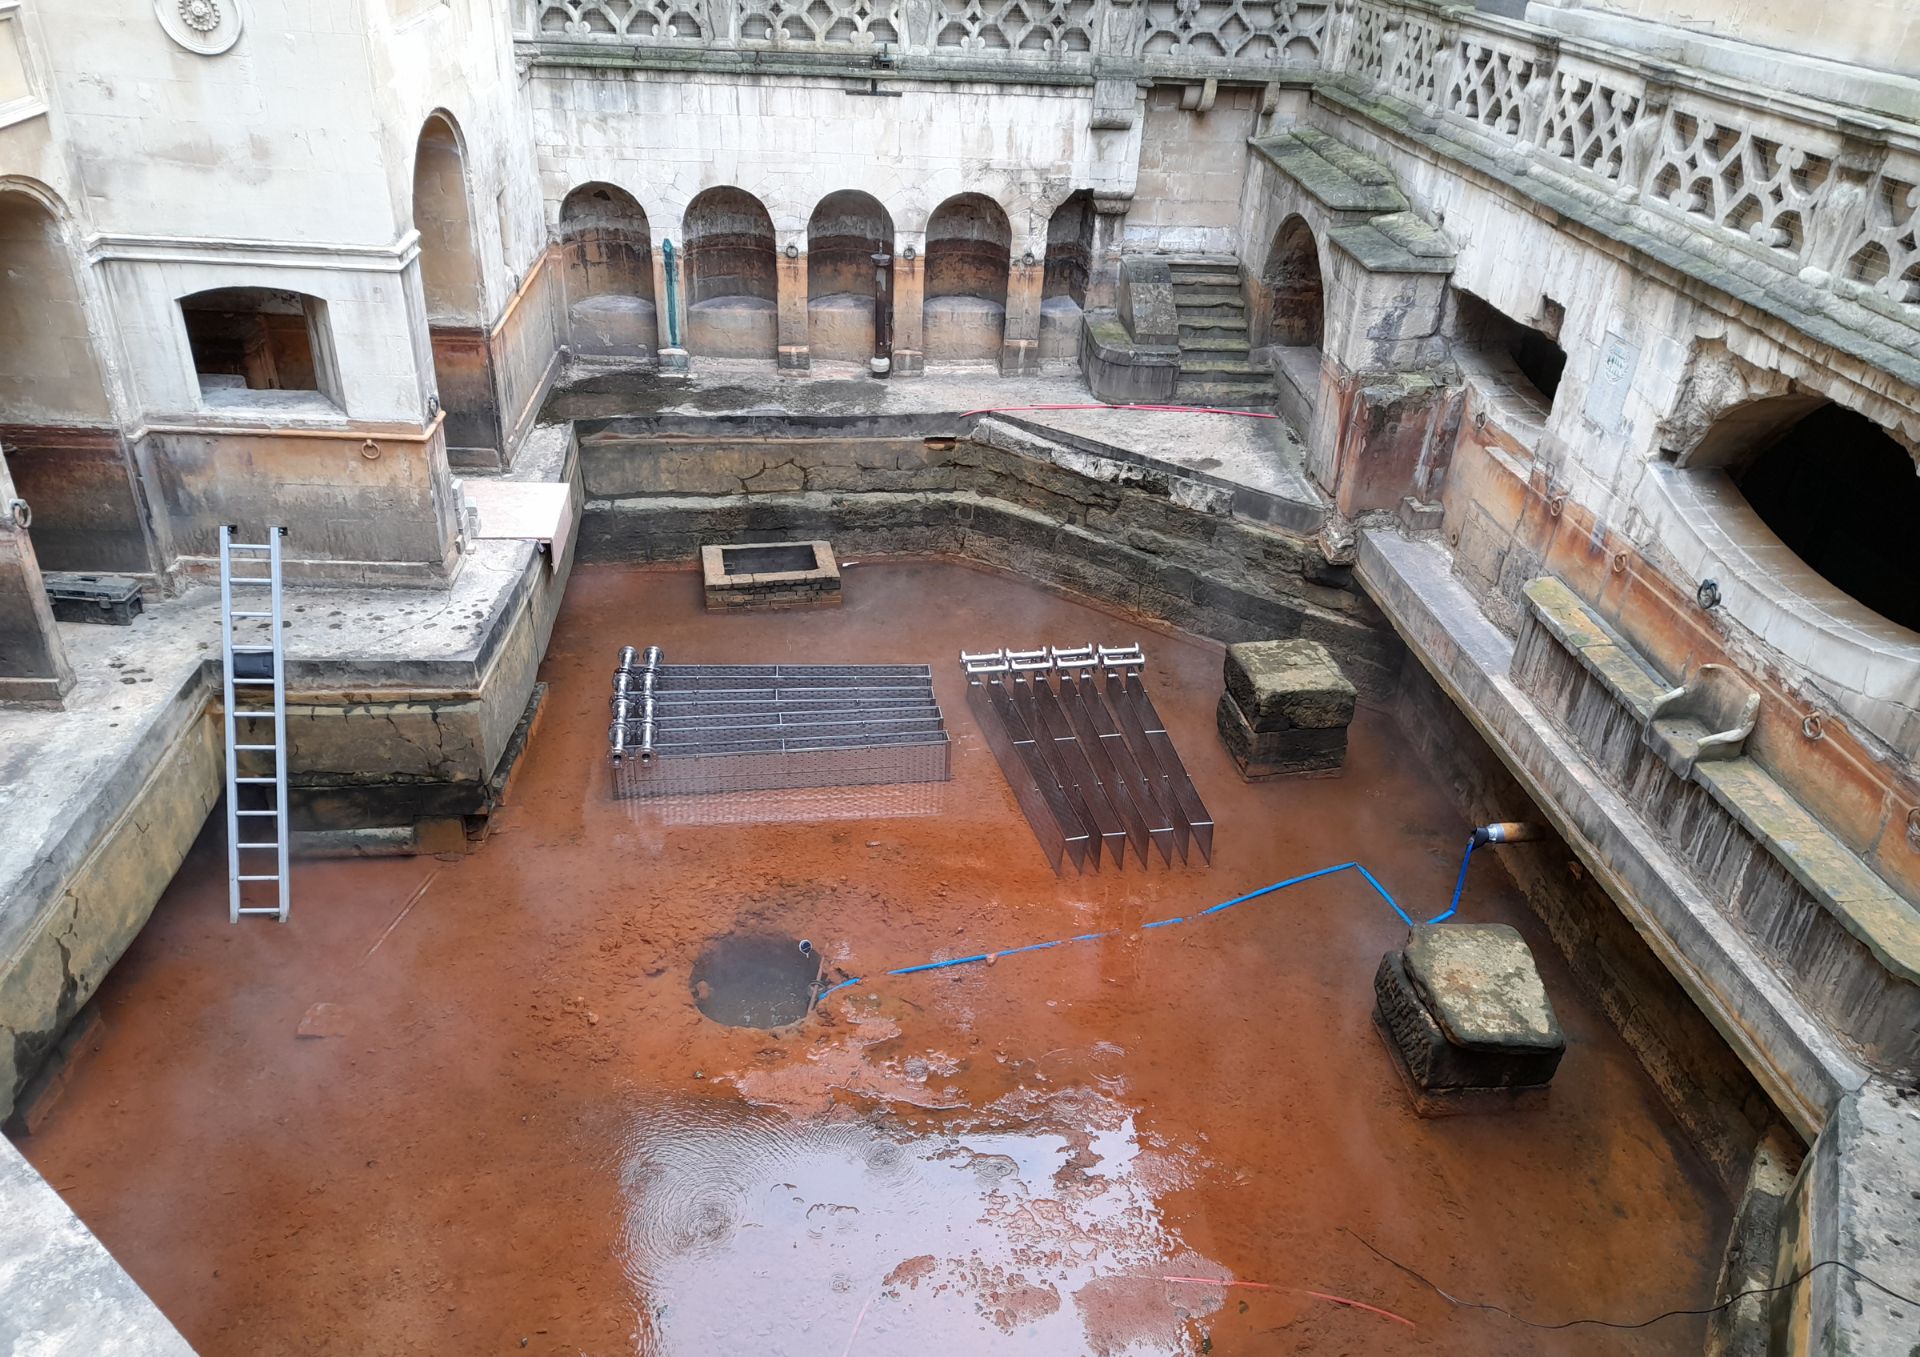 Photo of the drained Roman Baths showing installation of heat system